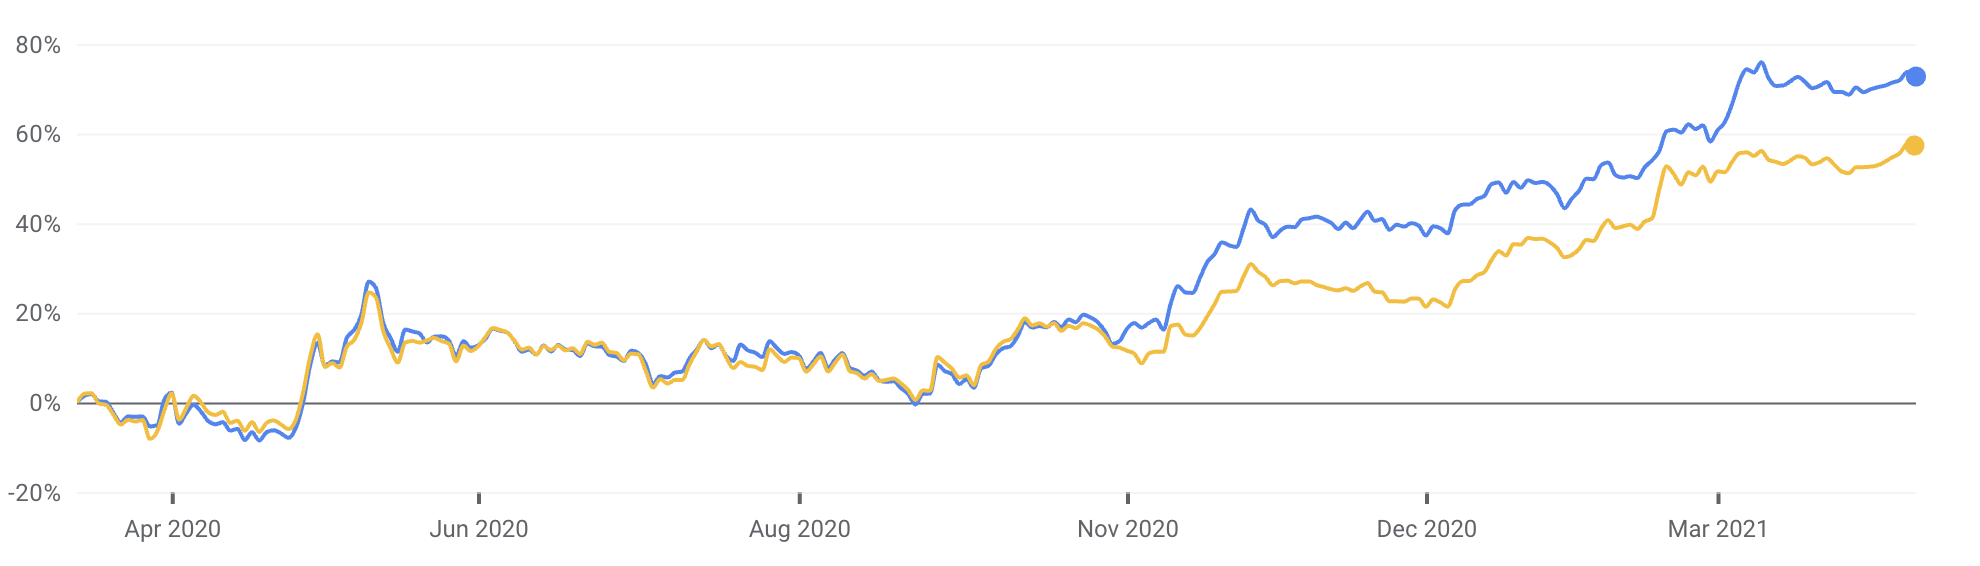 WBC and ANZ share price chart over 1 year, both companies are up strongly -- over 50%